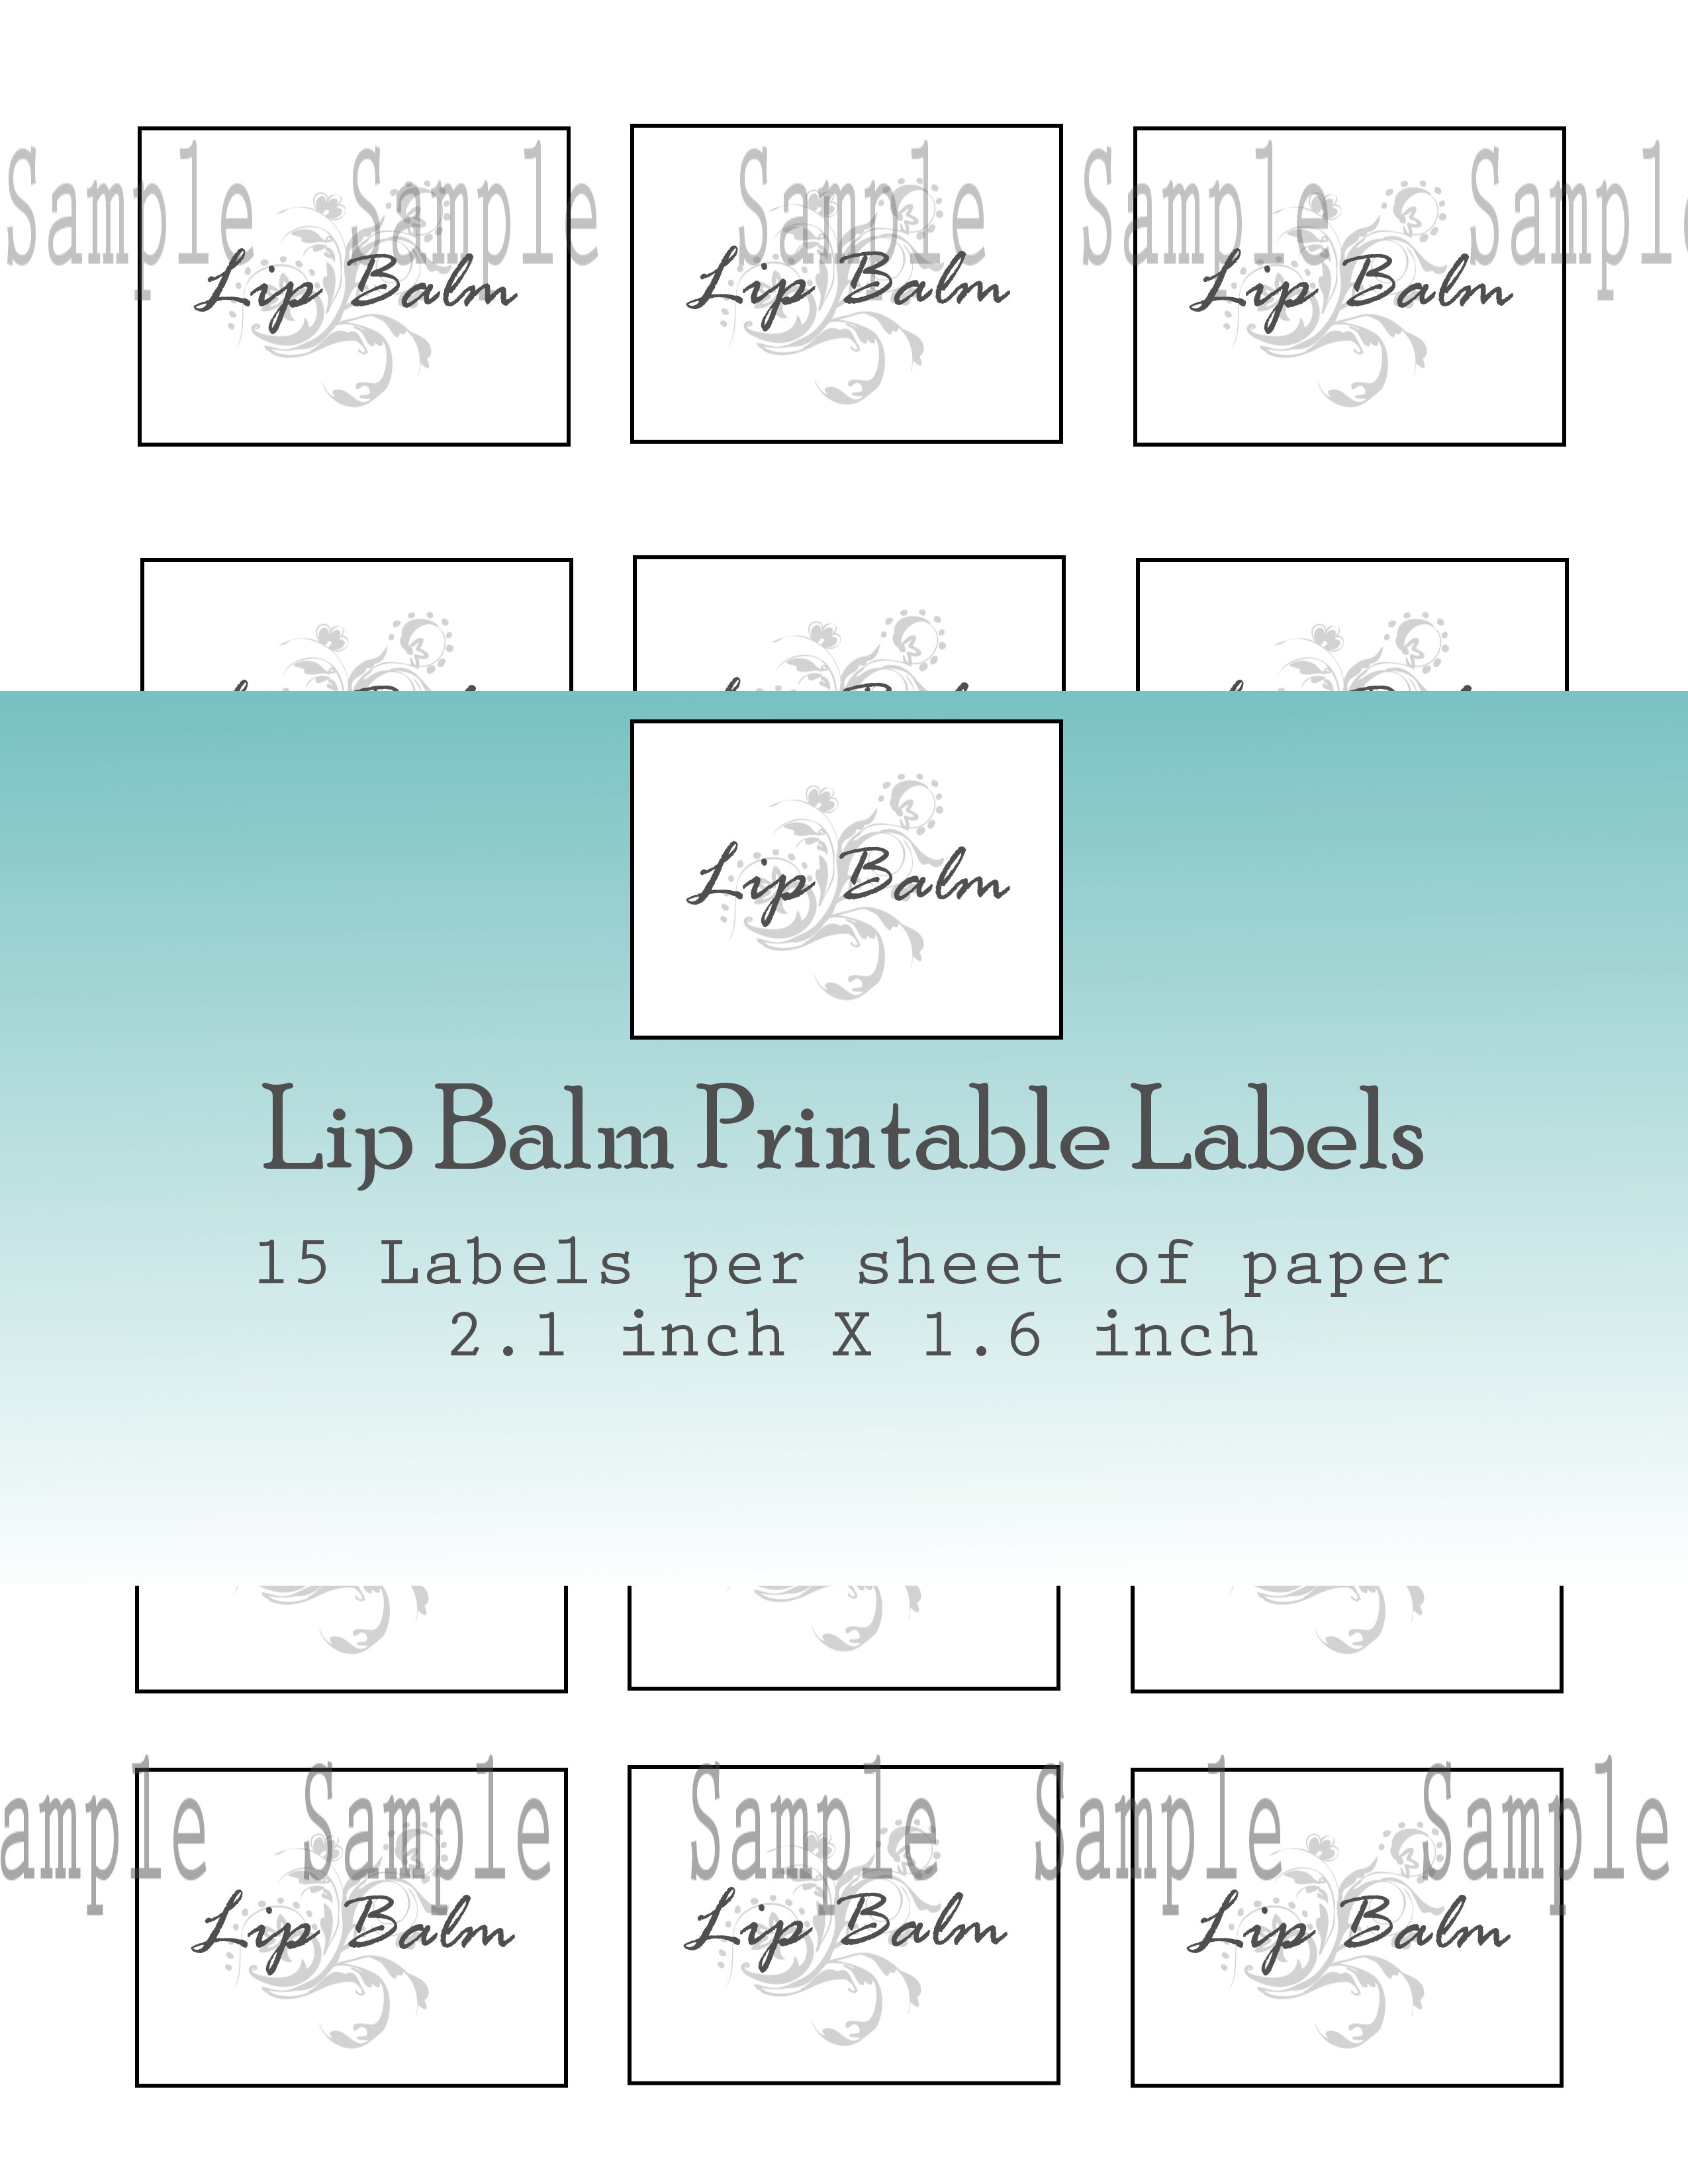 Search Results for “Free Editable Labels” – Calendar 2015